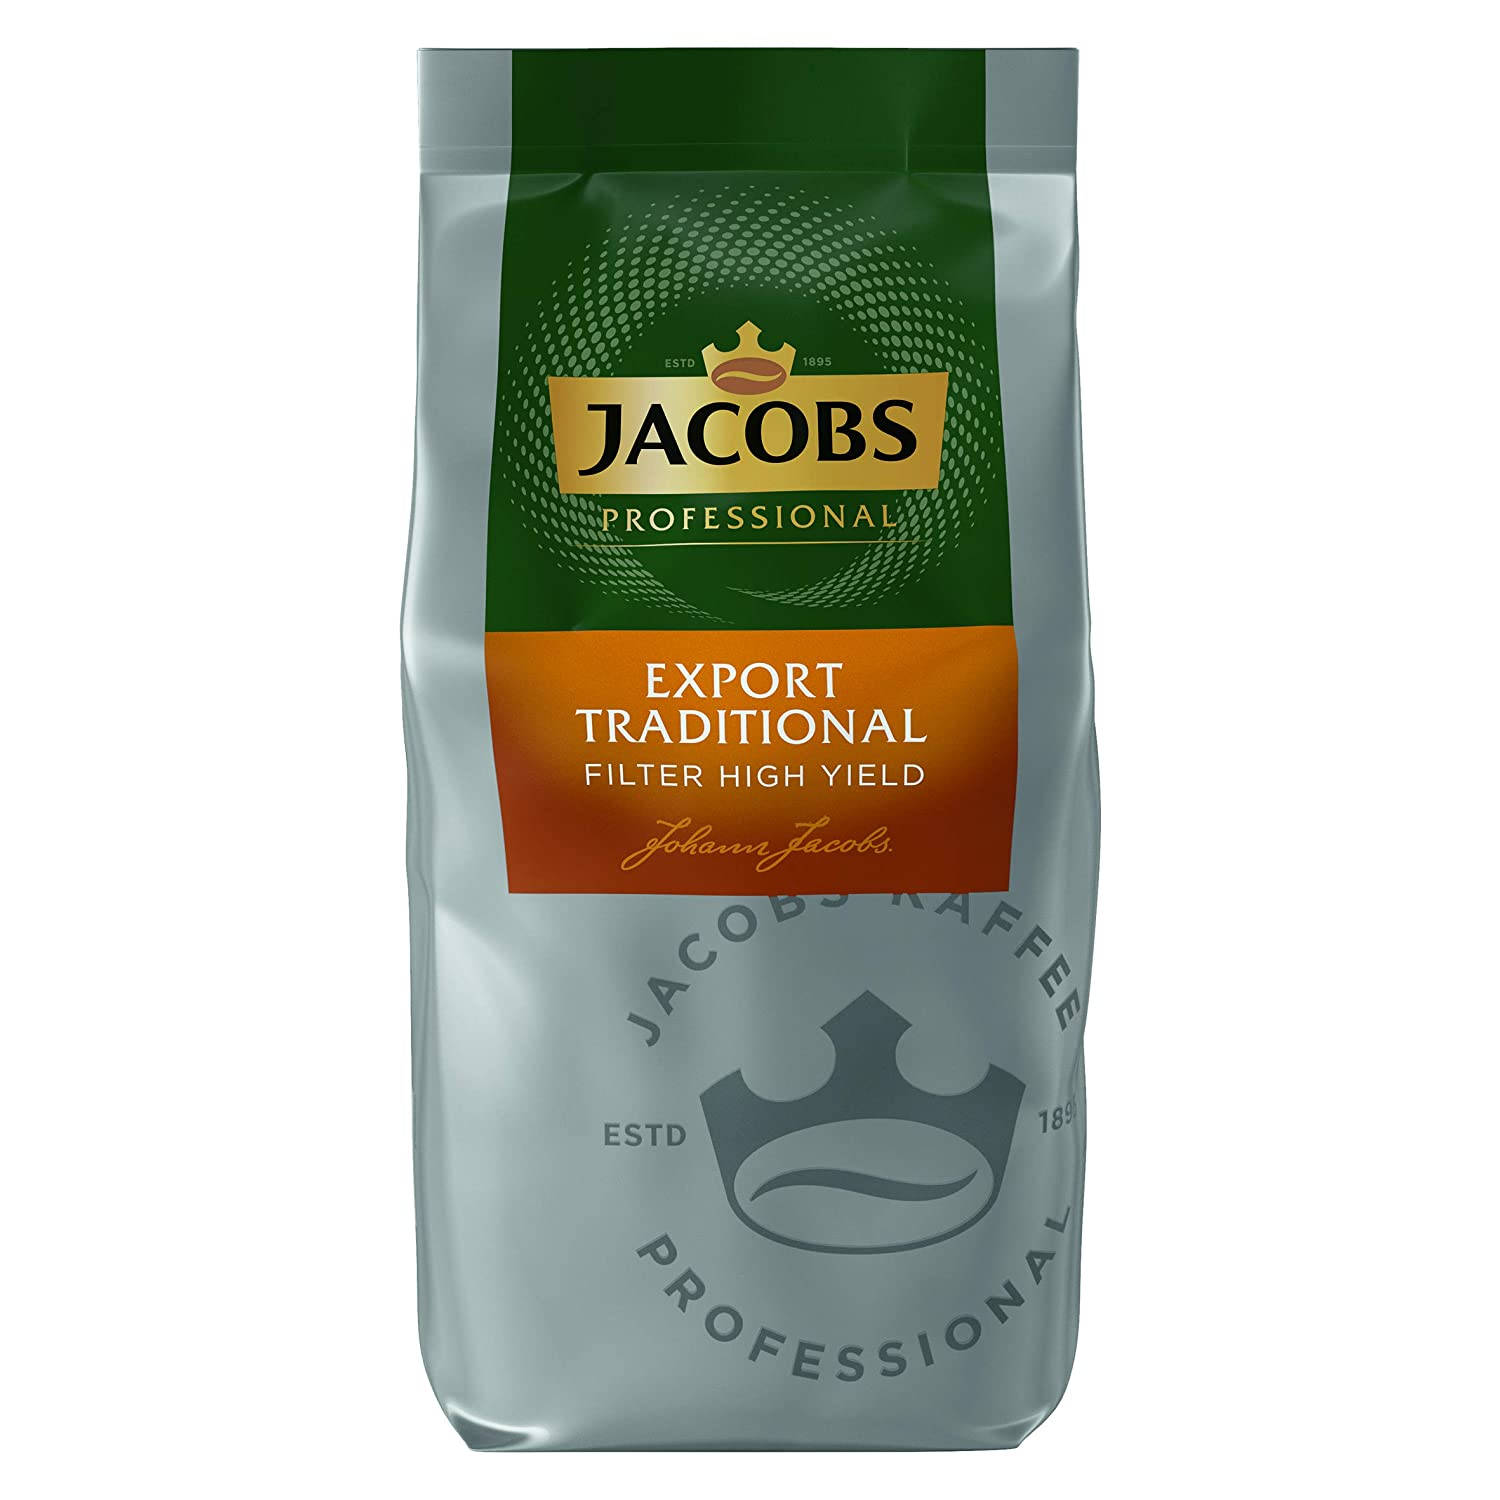 High 2x800g JACOBS Yield French (Filtermaschinen, Traditional Export Professional Press) Filterkaffee